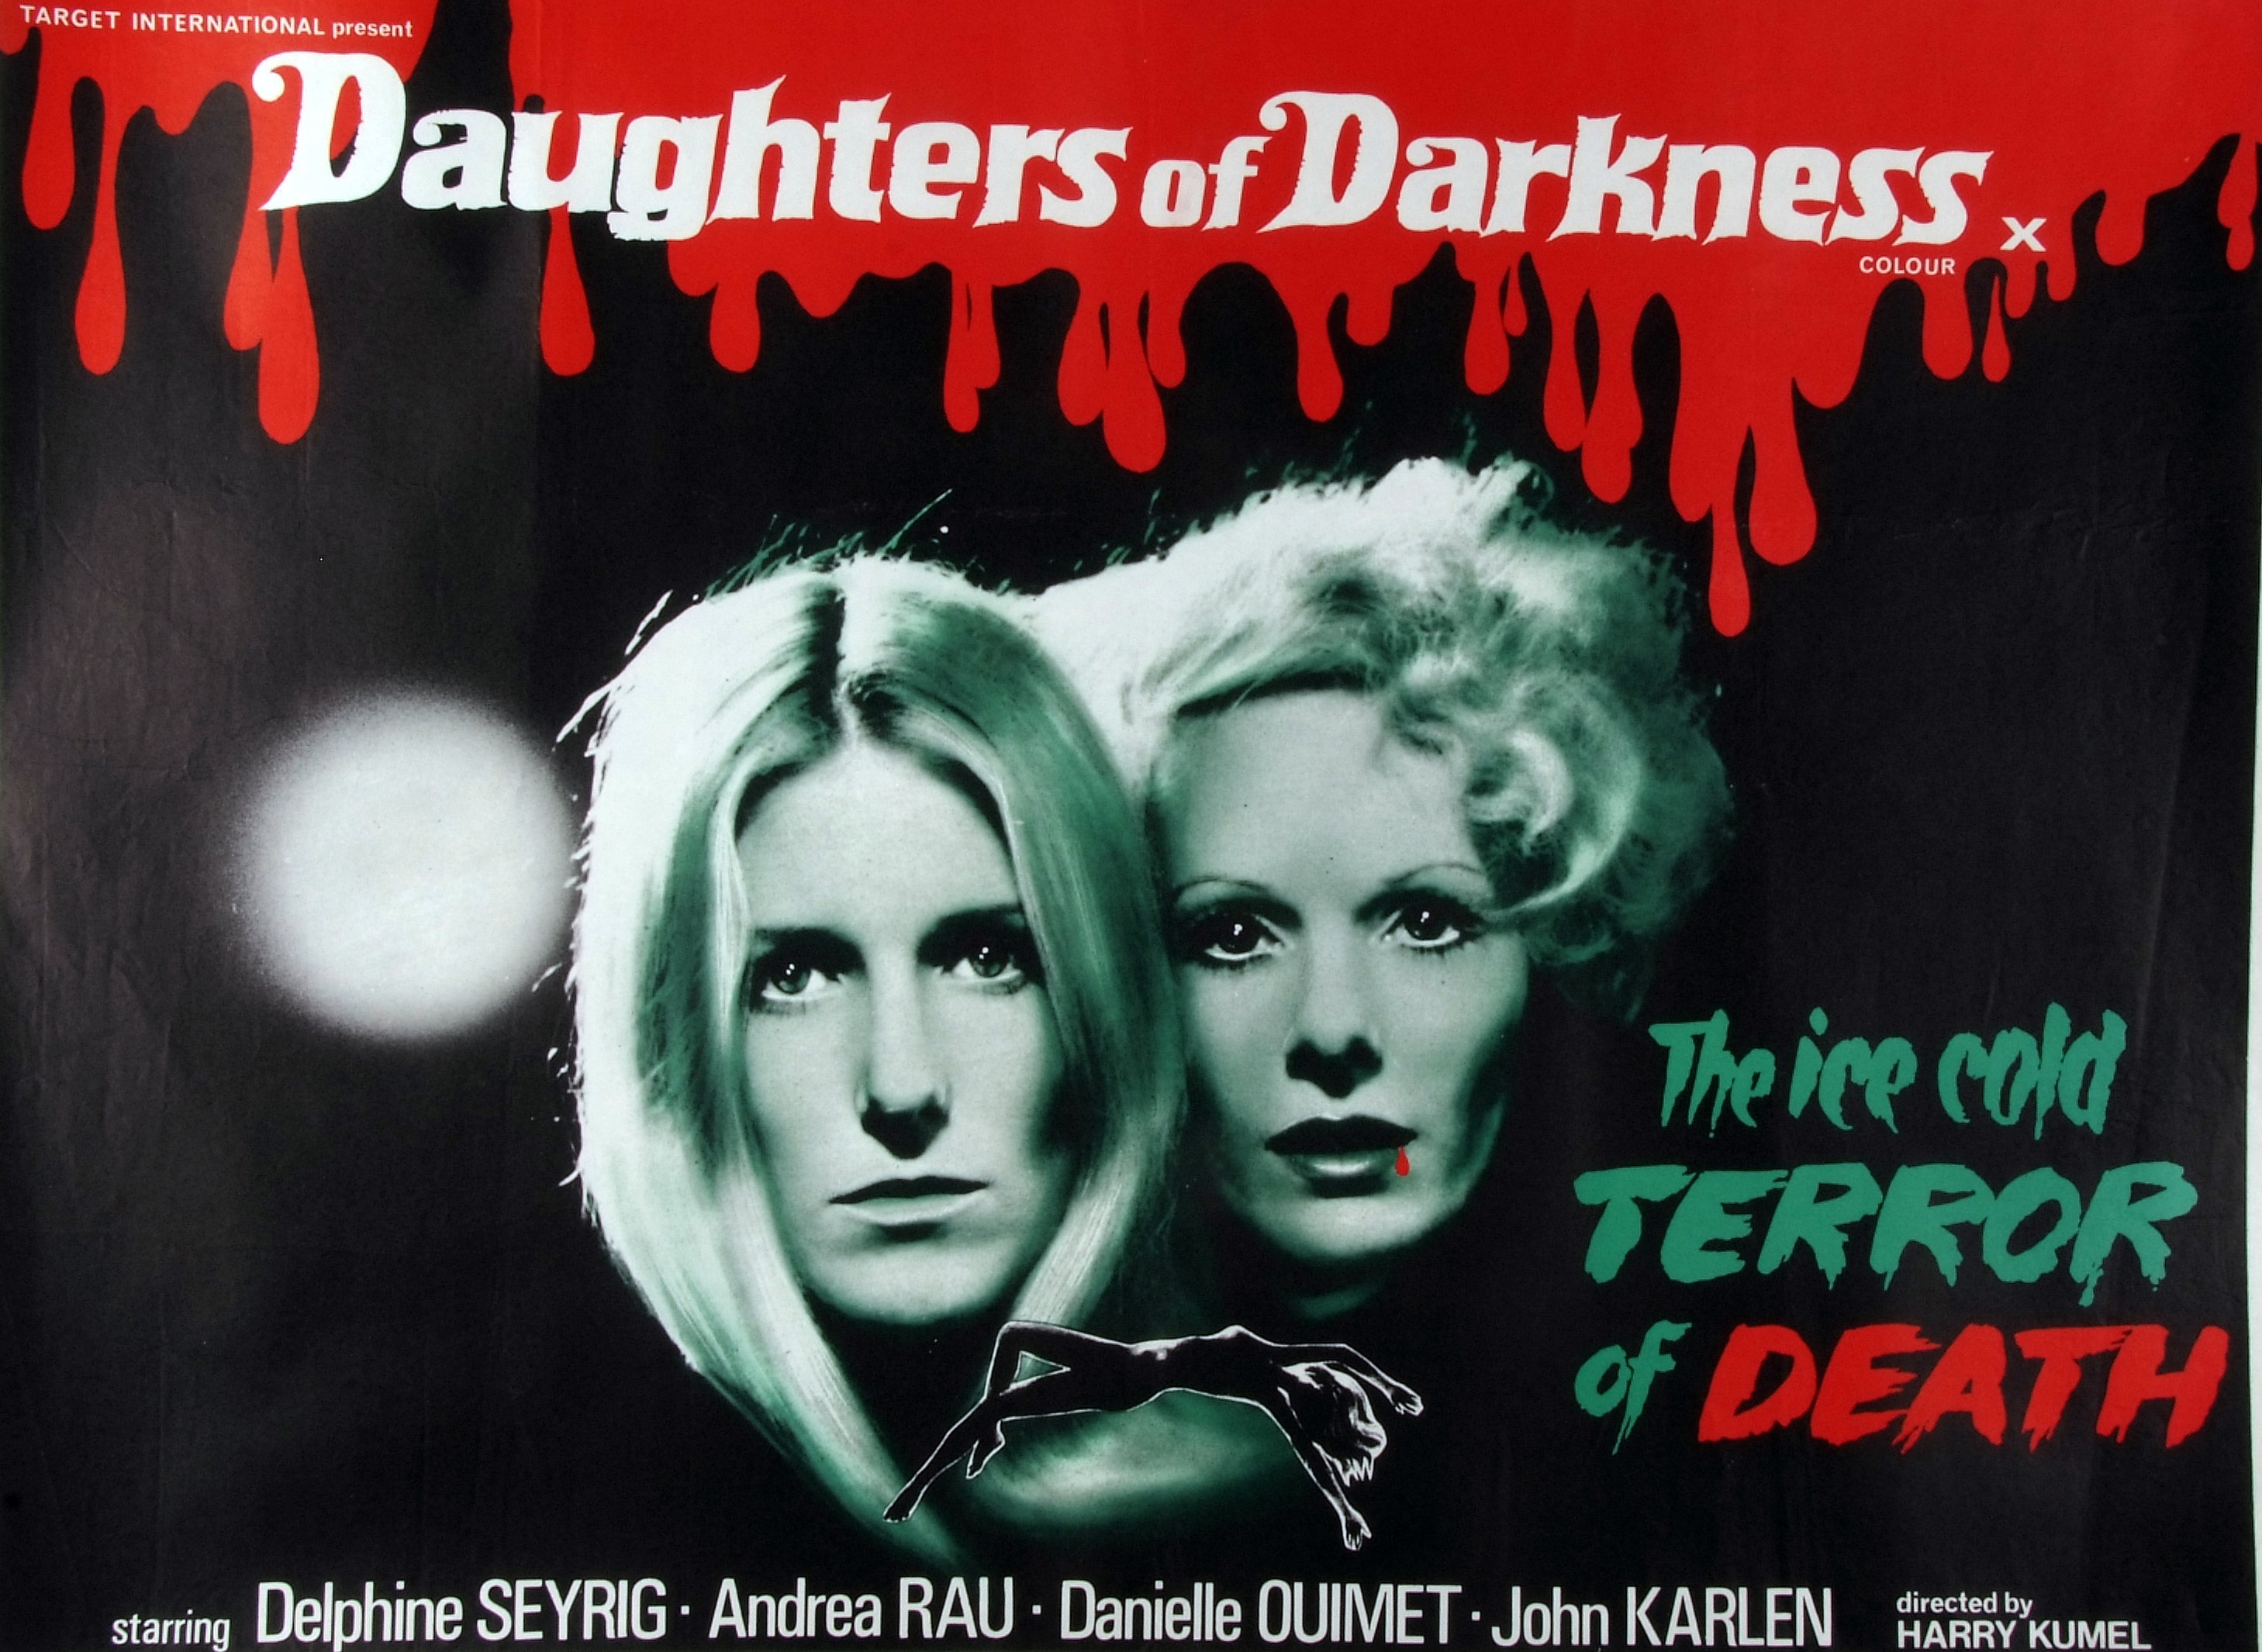 DAUGHTERS OF DARKNESS, film poster, starring Delphine Seyrig, Andrea Rau and John Karlen, Quad